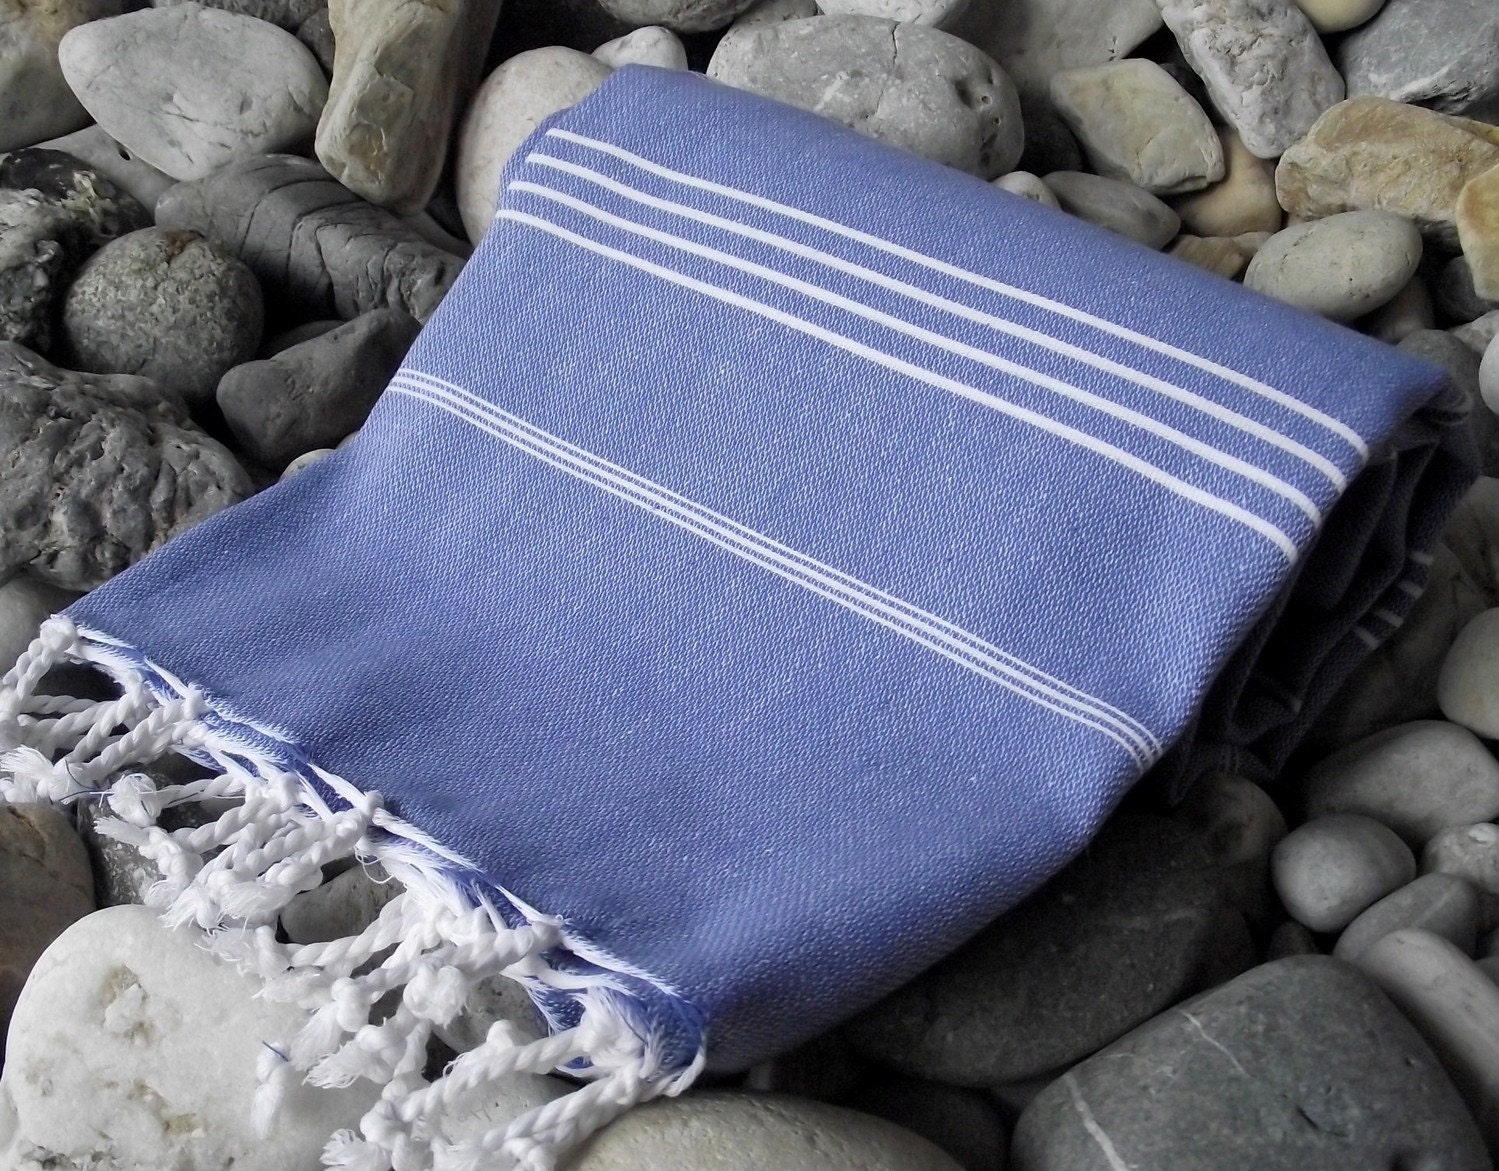 Best Quality Hand-Woven Turkish Cotton Bath Towel or Sarong-Blue and White Stripes